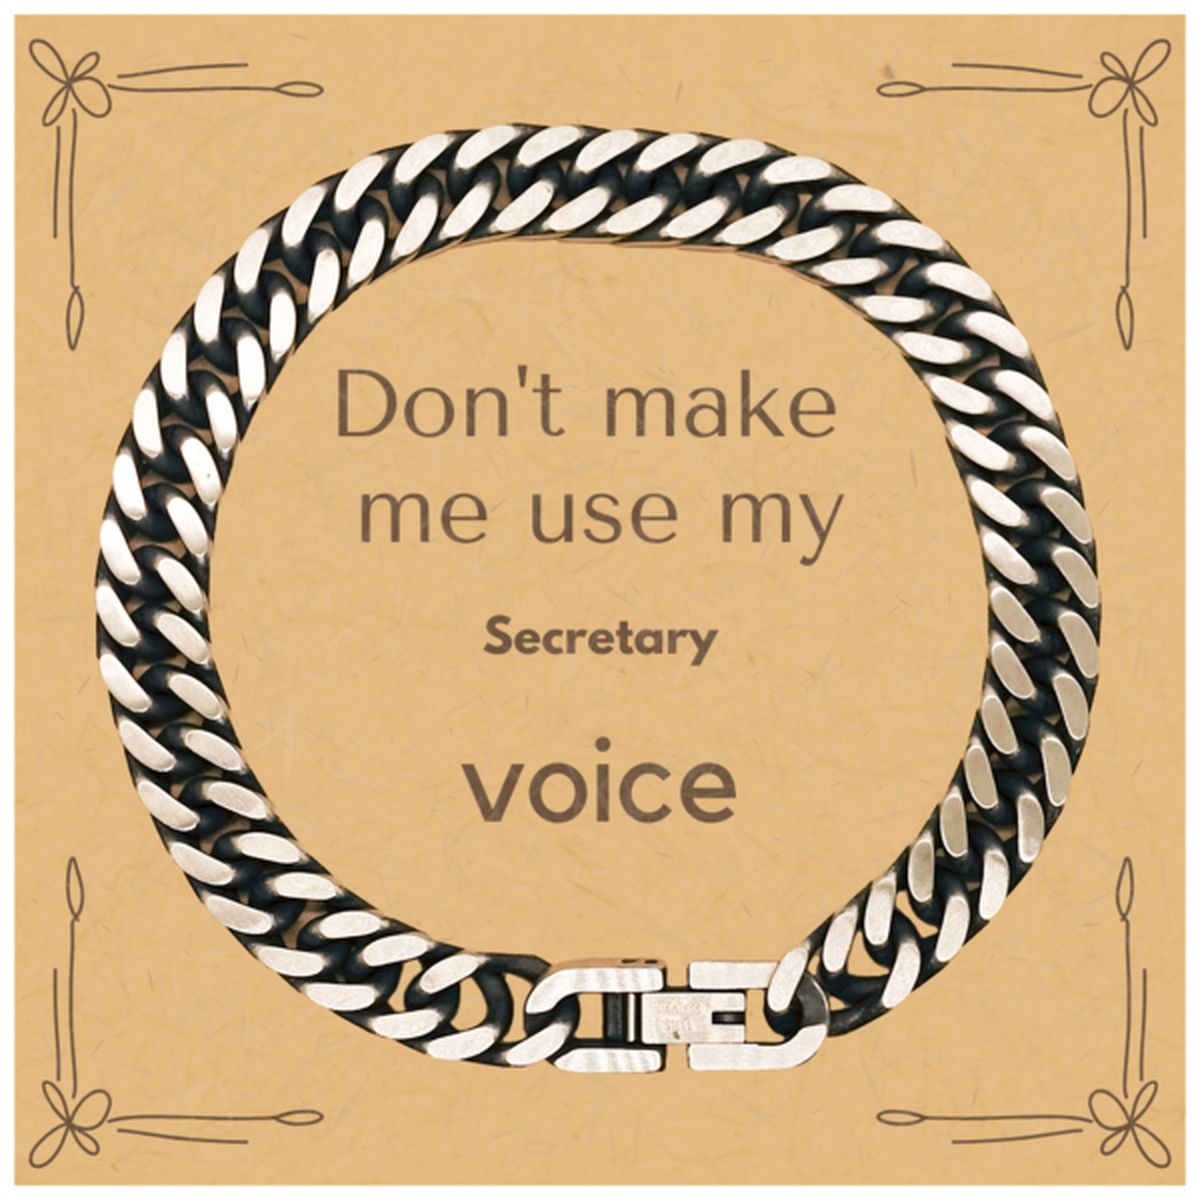 Don't make me use my Secretary voice, Sarcasm Secretary Card Gifts, Christmas Secretary Cuban Link Chain Bracelet Birthday Unique Gifts For Secretary Coworkers, Men, Women, Colleague, Friends